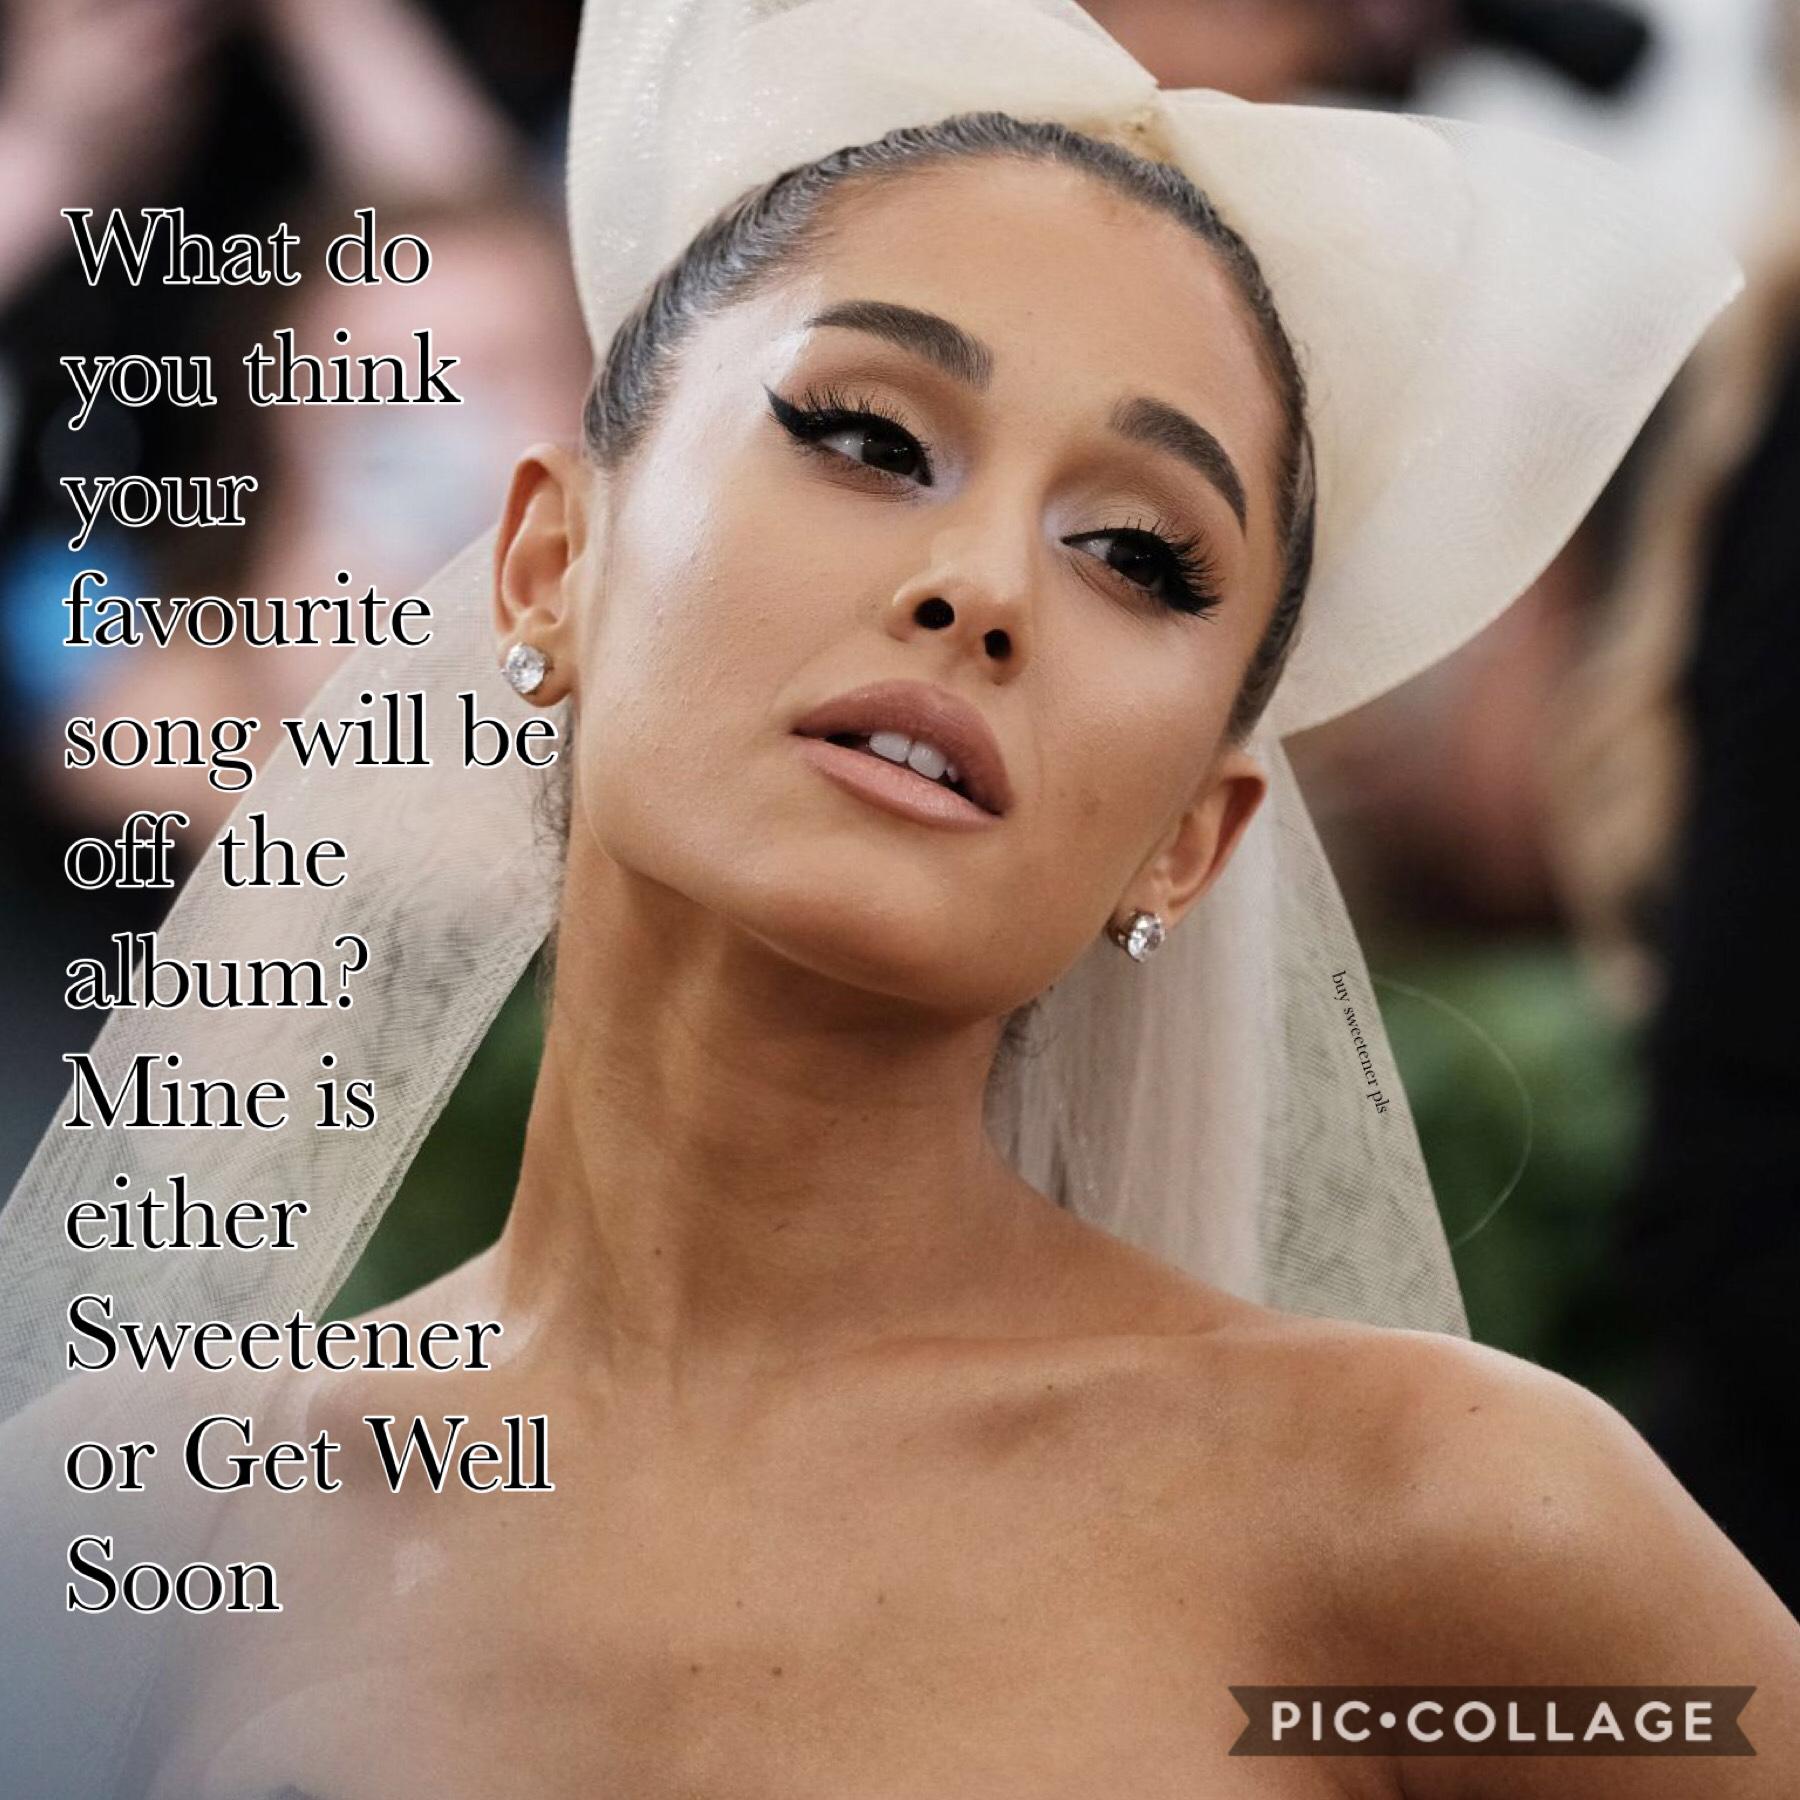 Sweetener and Get Well Soon are my favs I think...